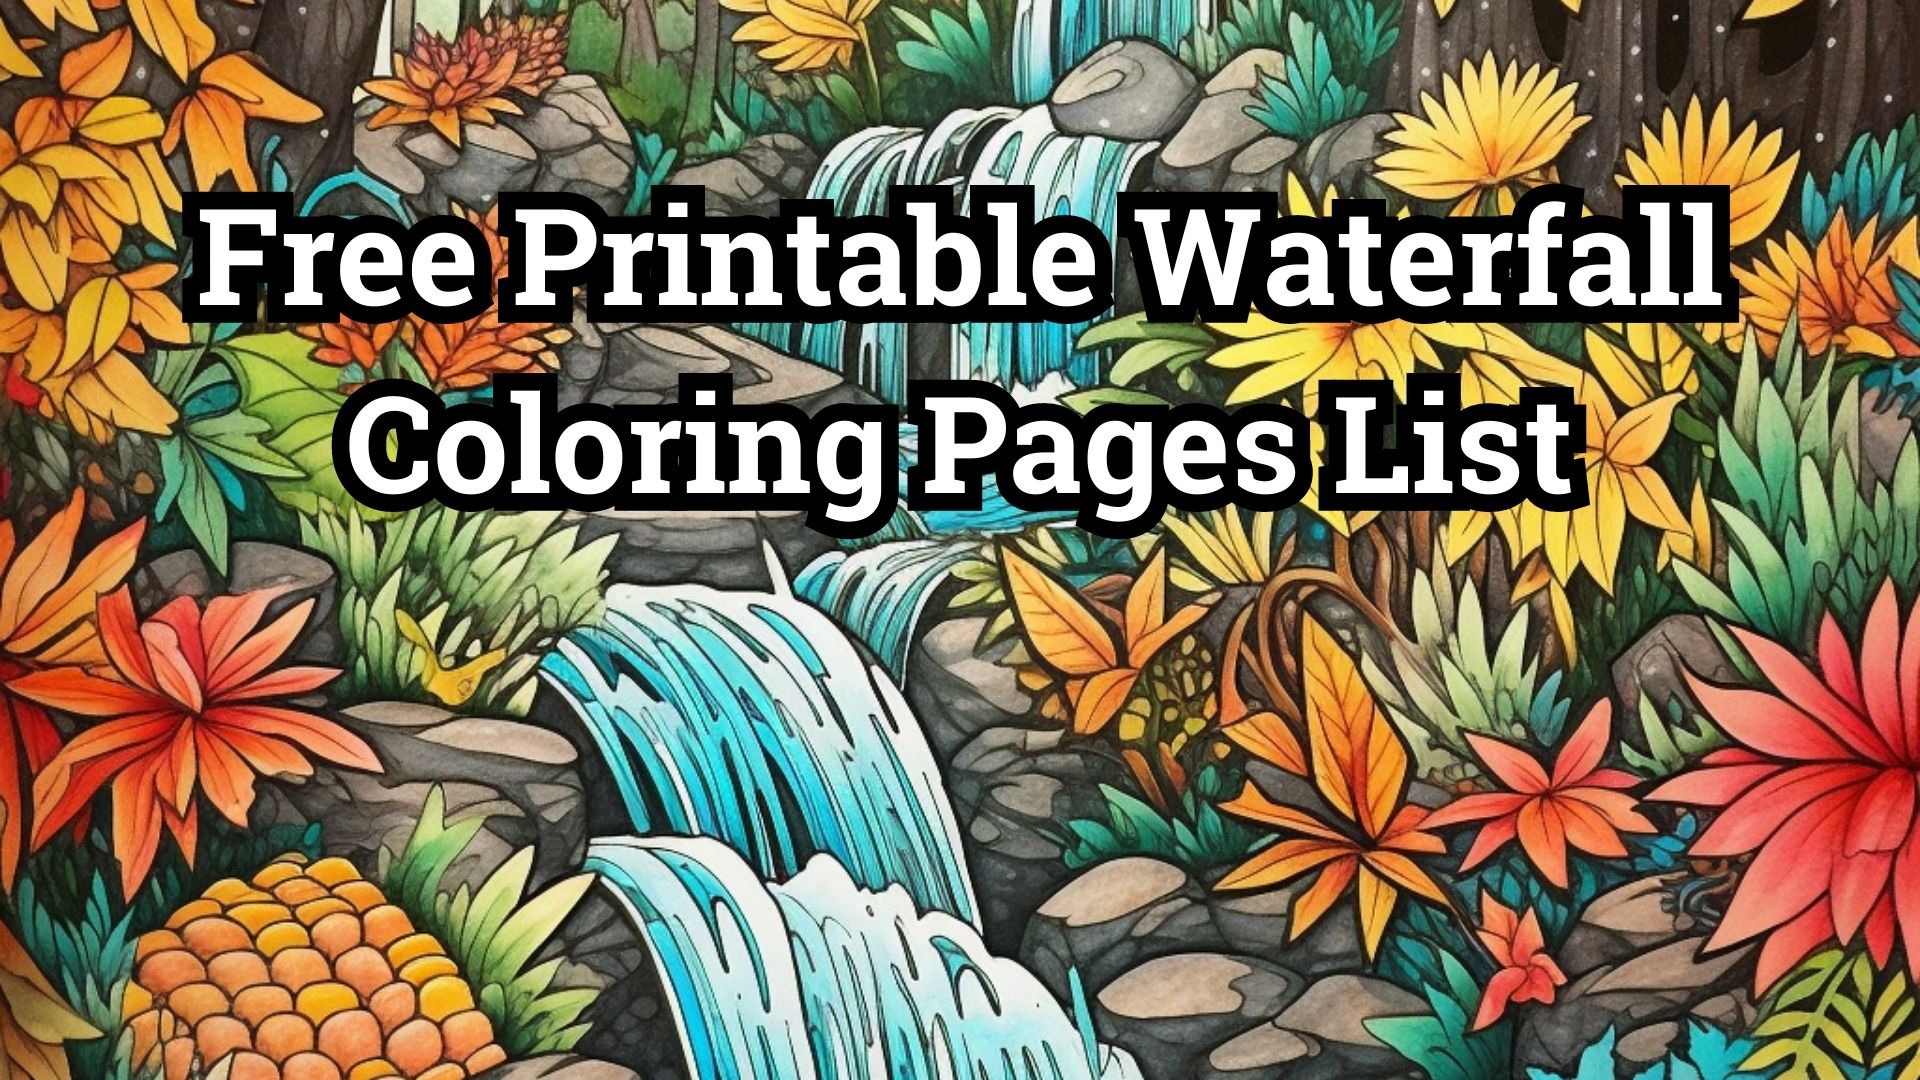 Free Printable Waterfall Coloring Pages List